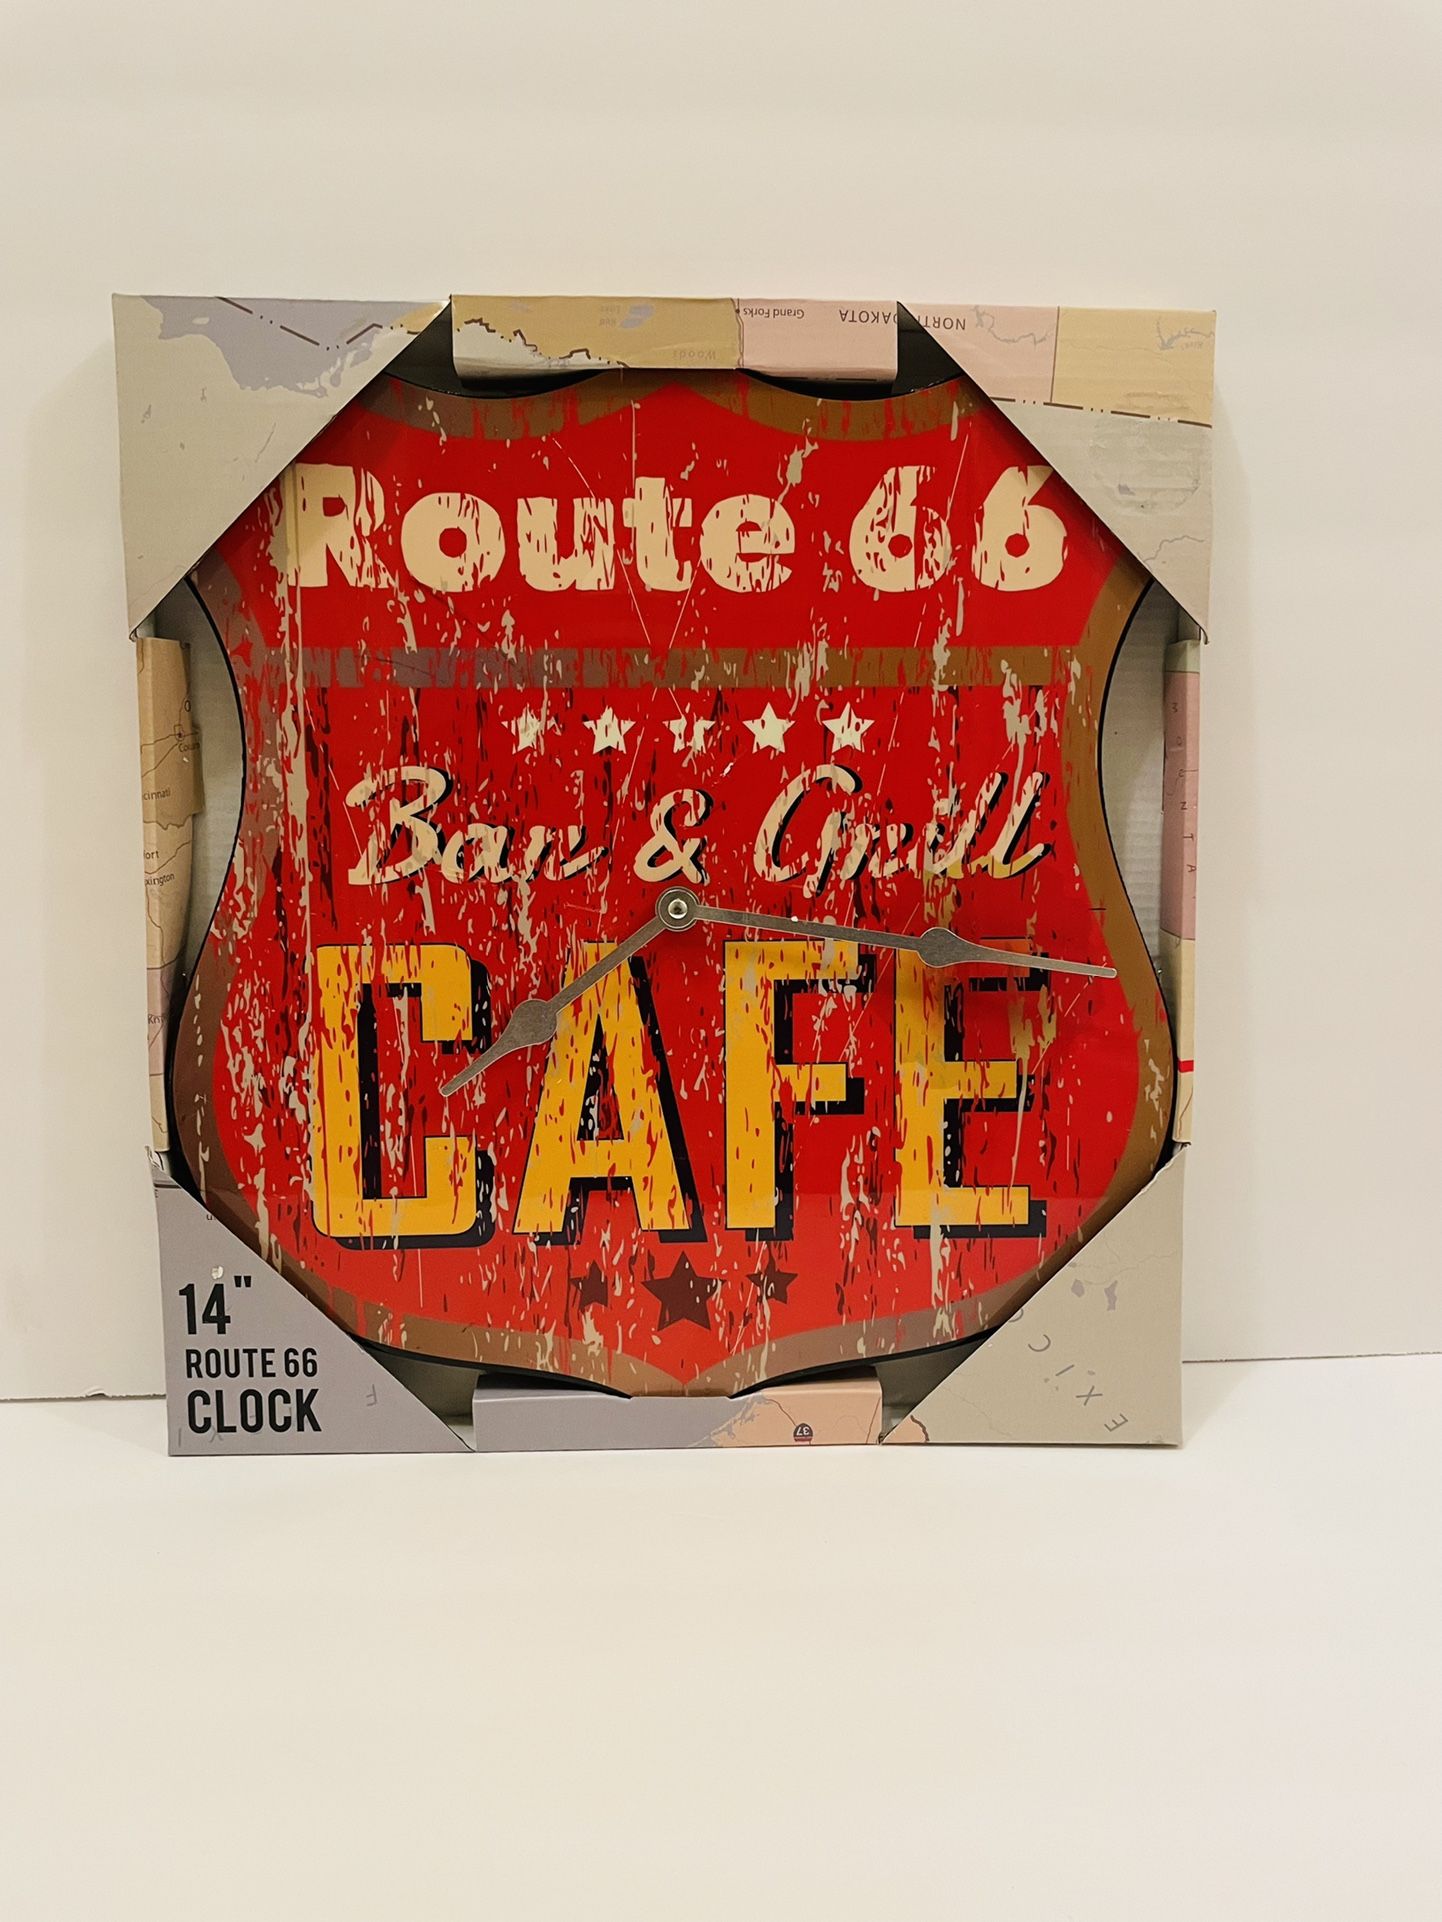 14” Route 66 Wall Clock Bar Game Room Man Cave Garage By TMD Holdings